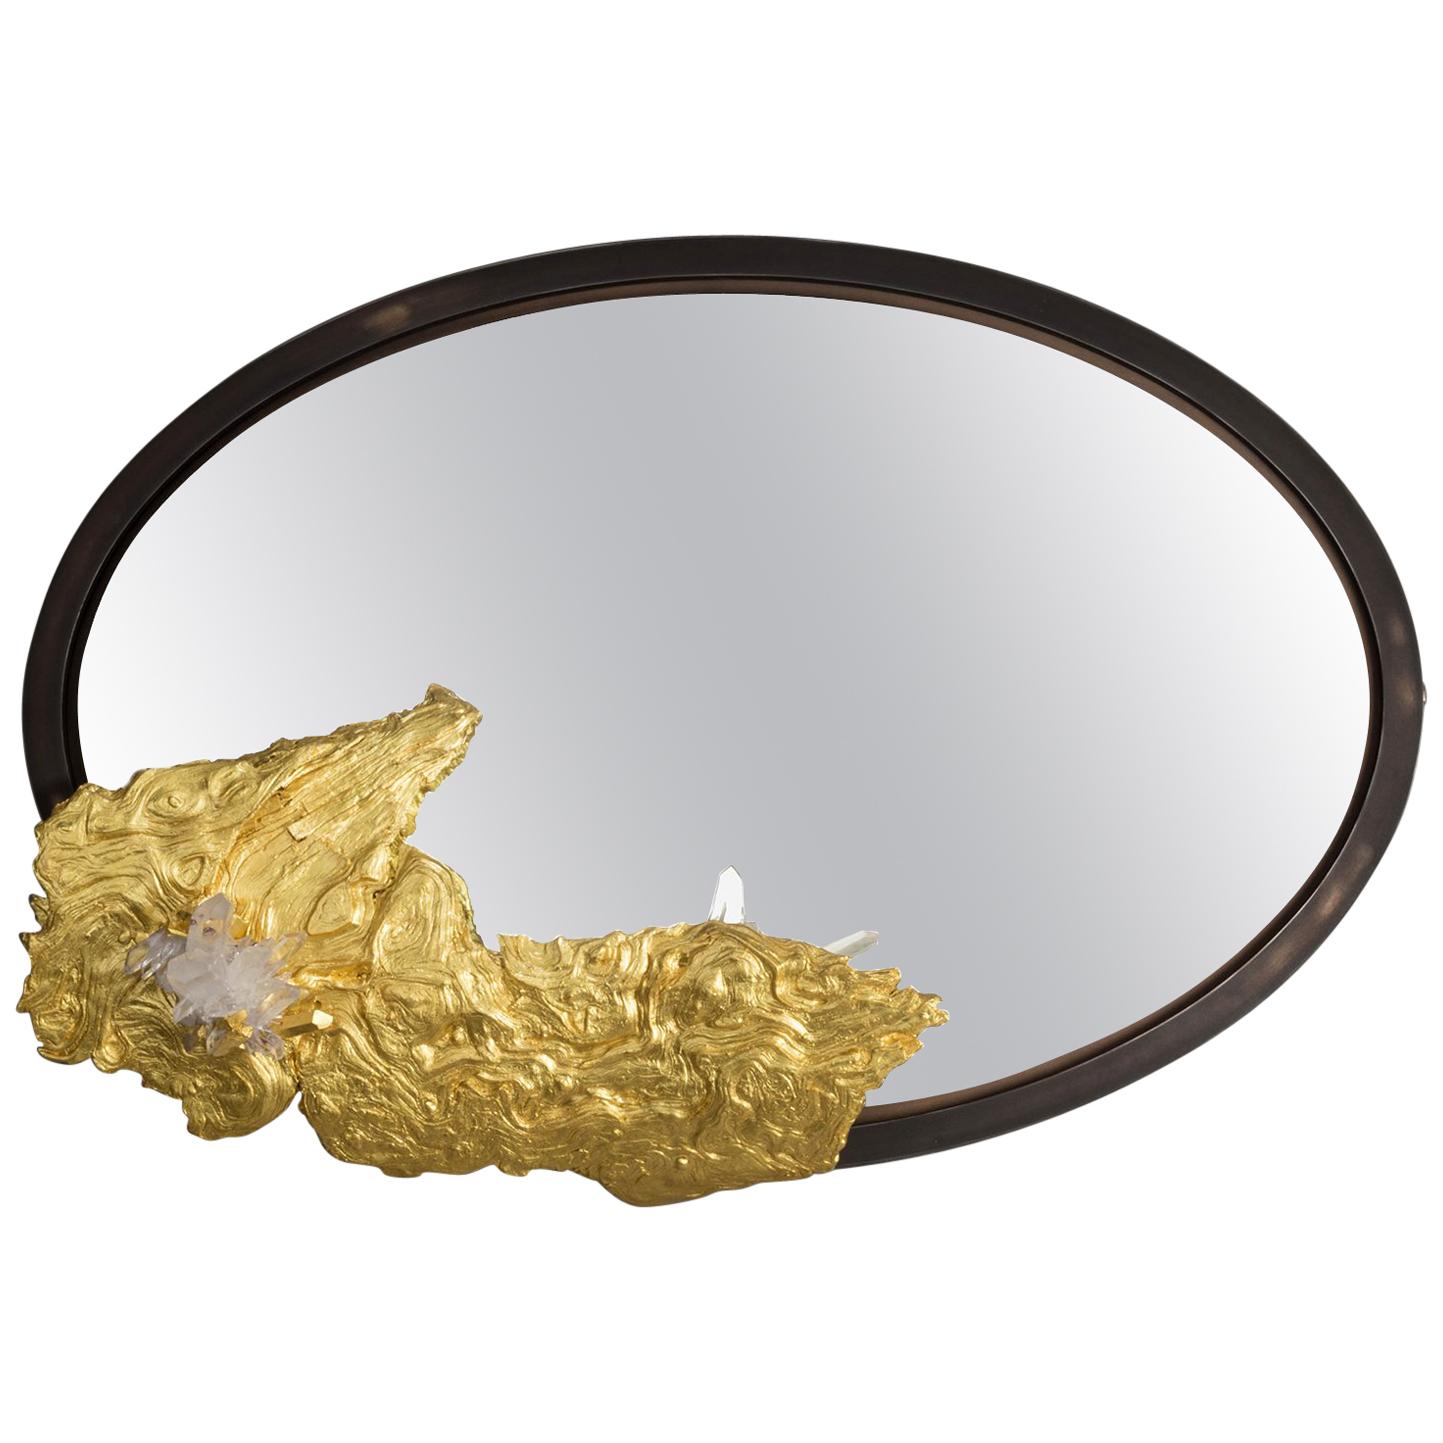 Studio Greytak 'Mirror 3' With Gold Leafed Montana Pine and Colombian Crystal For Sale